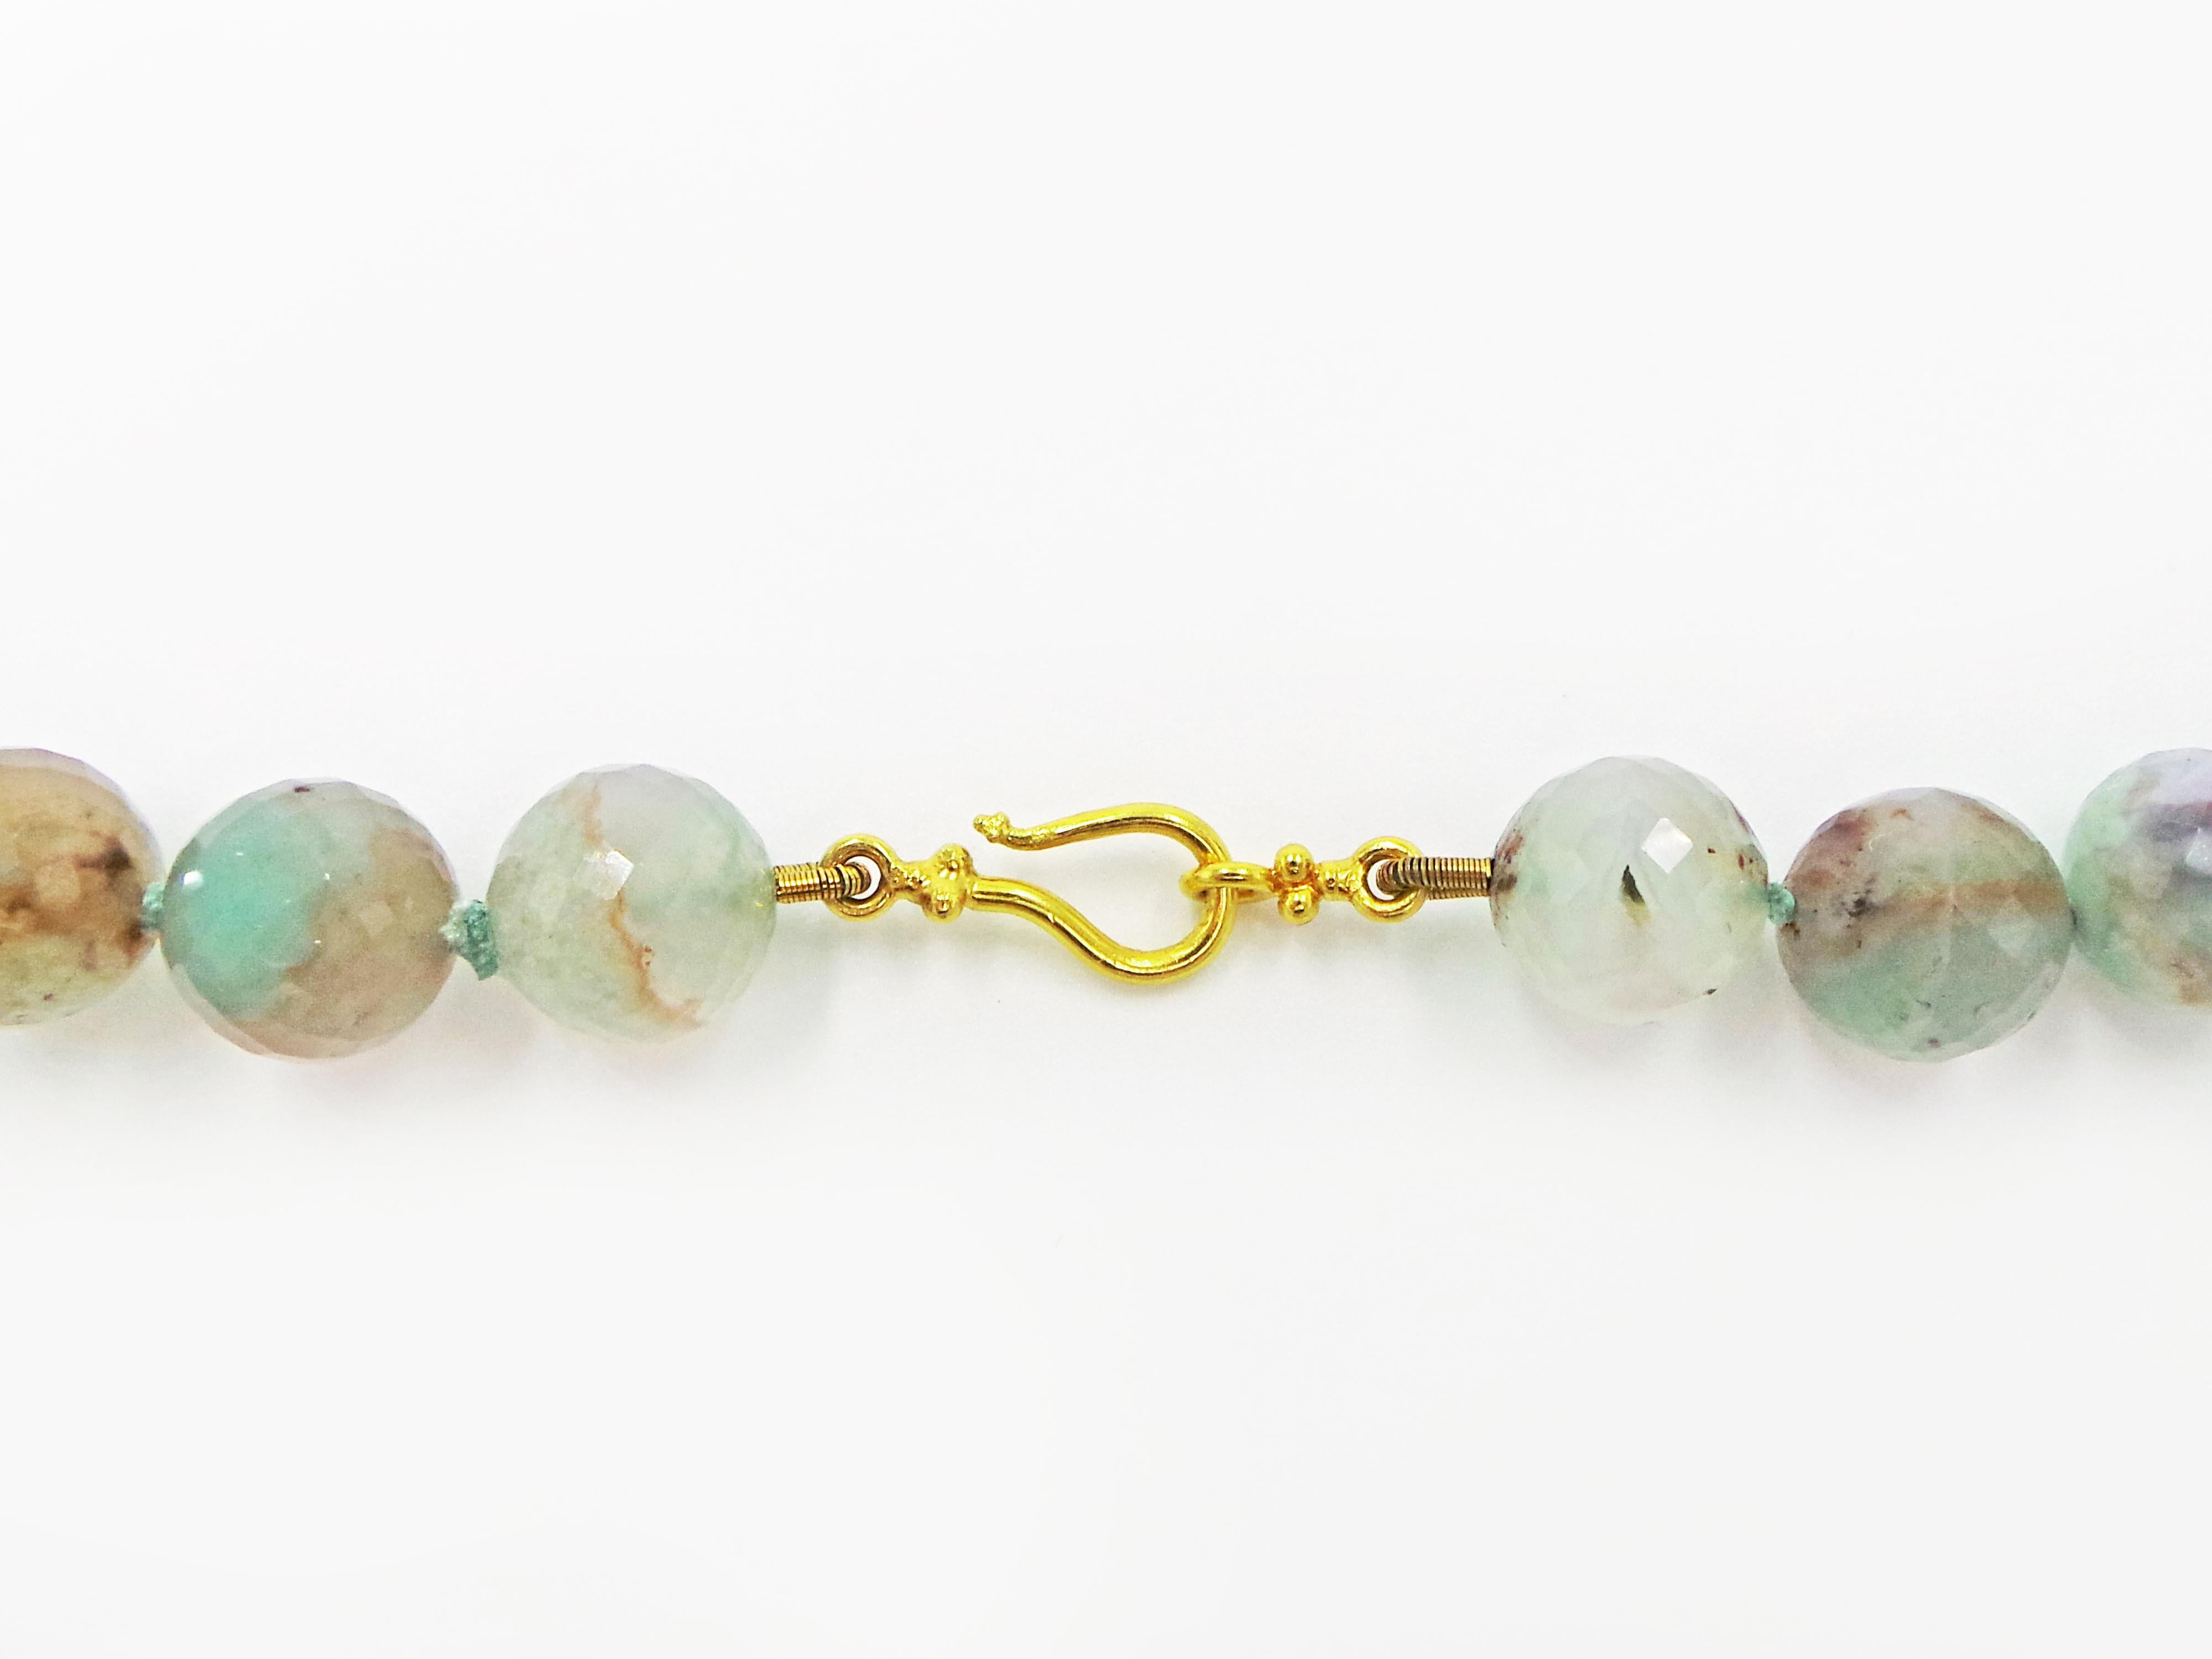 Beautiful and unique necklace featuring faceted Aquaprase beads hand-strung and finished with a 22k yellow gold toggle clasp. Aquaprase is one of the most recently discovered gemstones, being unearthed in 2014 by a gem explorer in Africa. Its